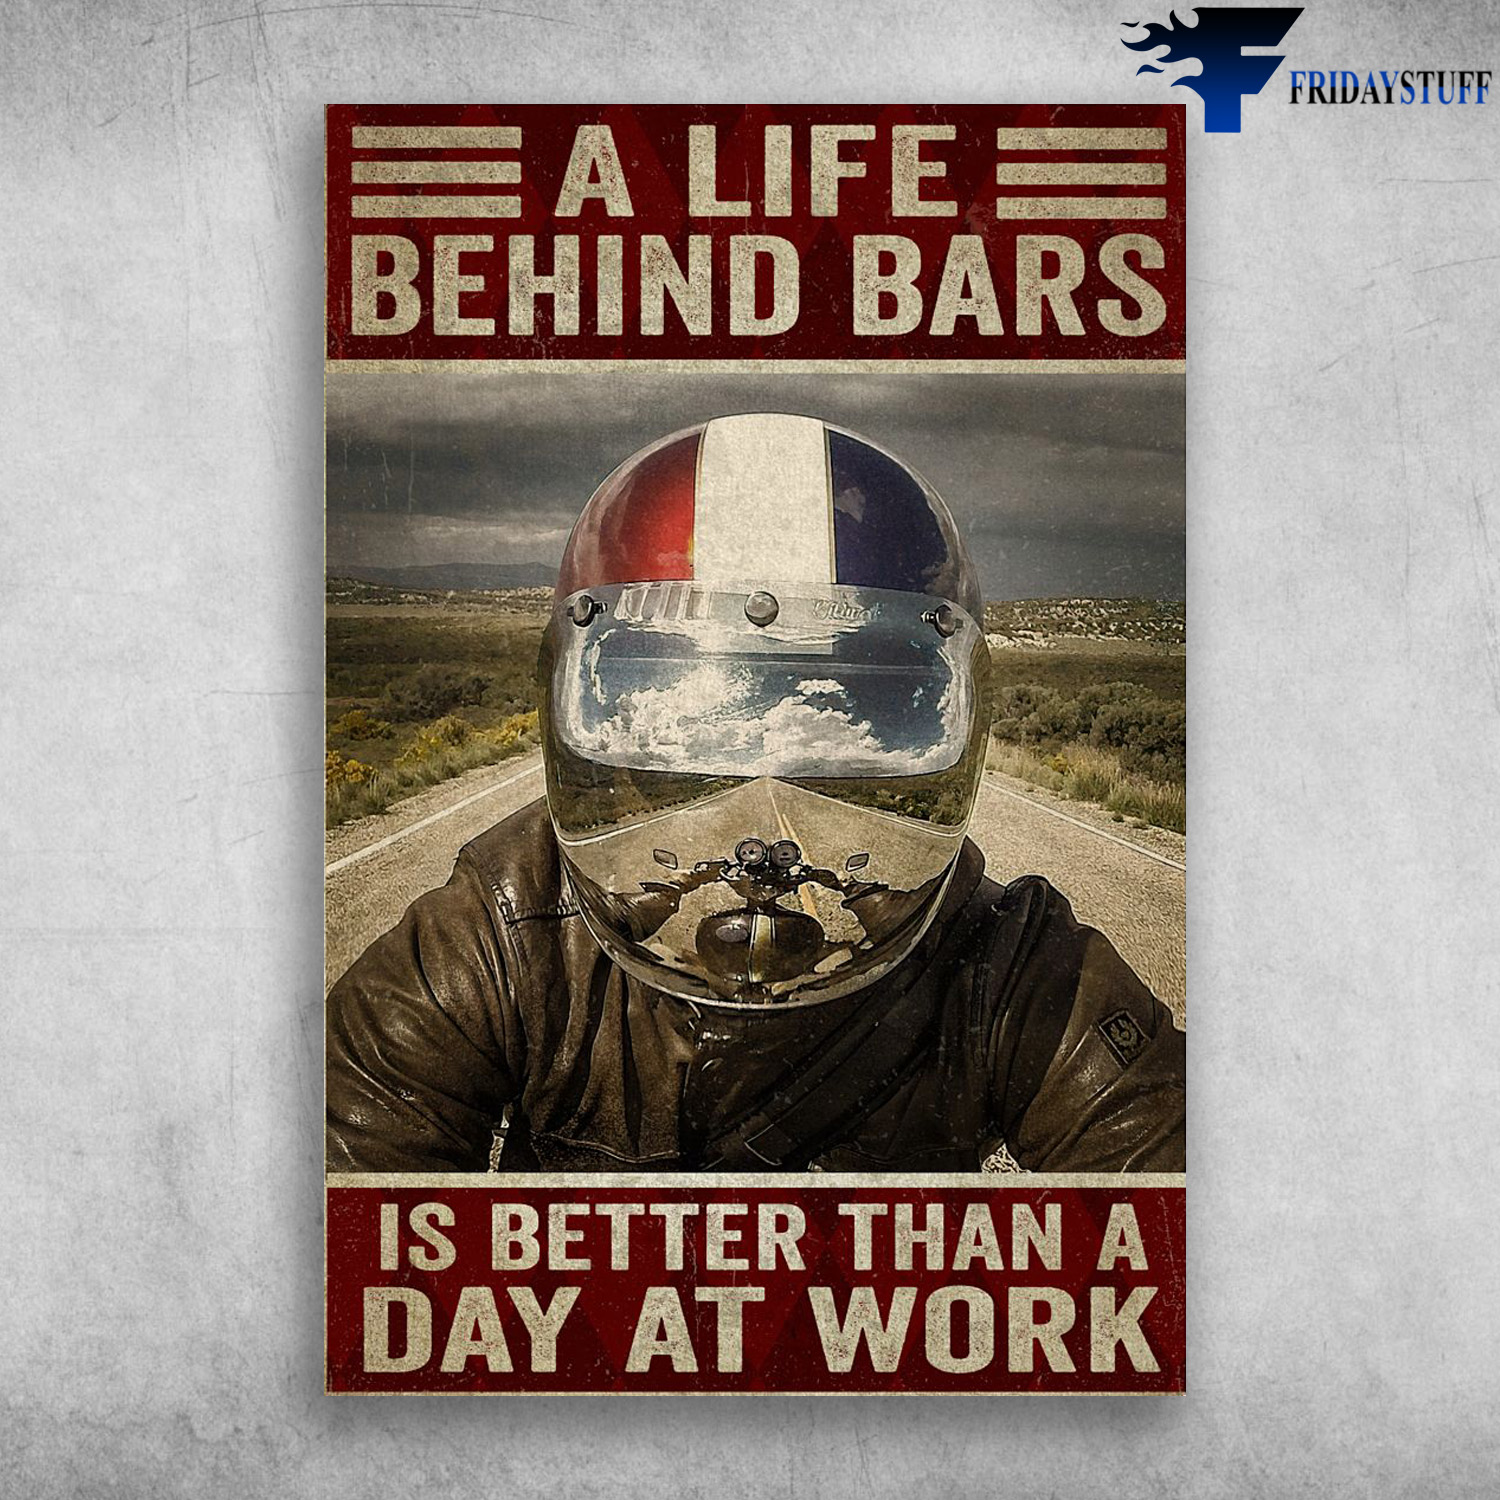 Cruiser Motorcycle - A Life Behind Bars, Is Better Than A Day At Work